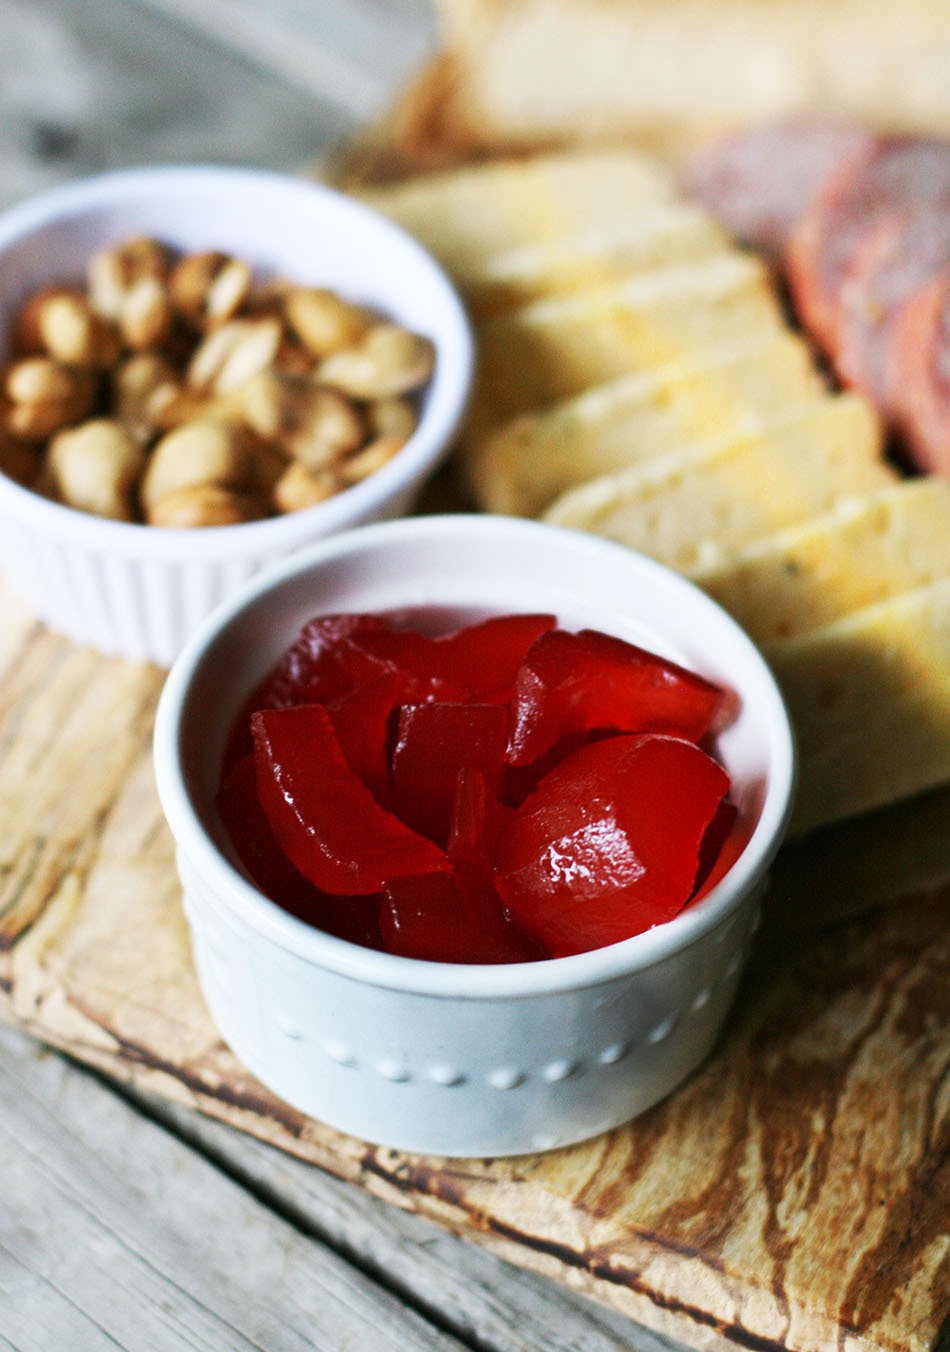 Cinnamon Red Hots pickles: Aka Christmas pickles. Learn how to make them at home!